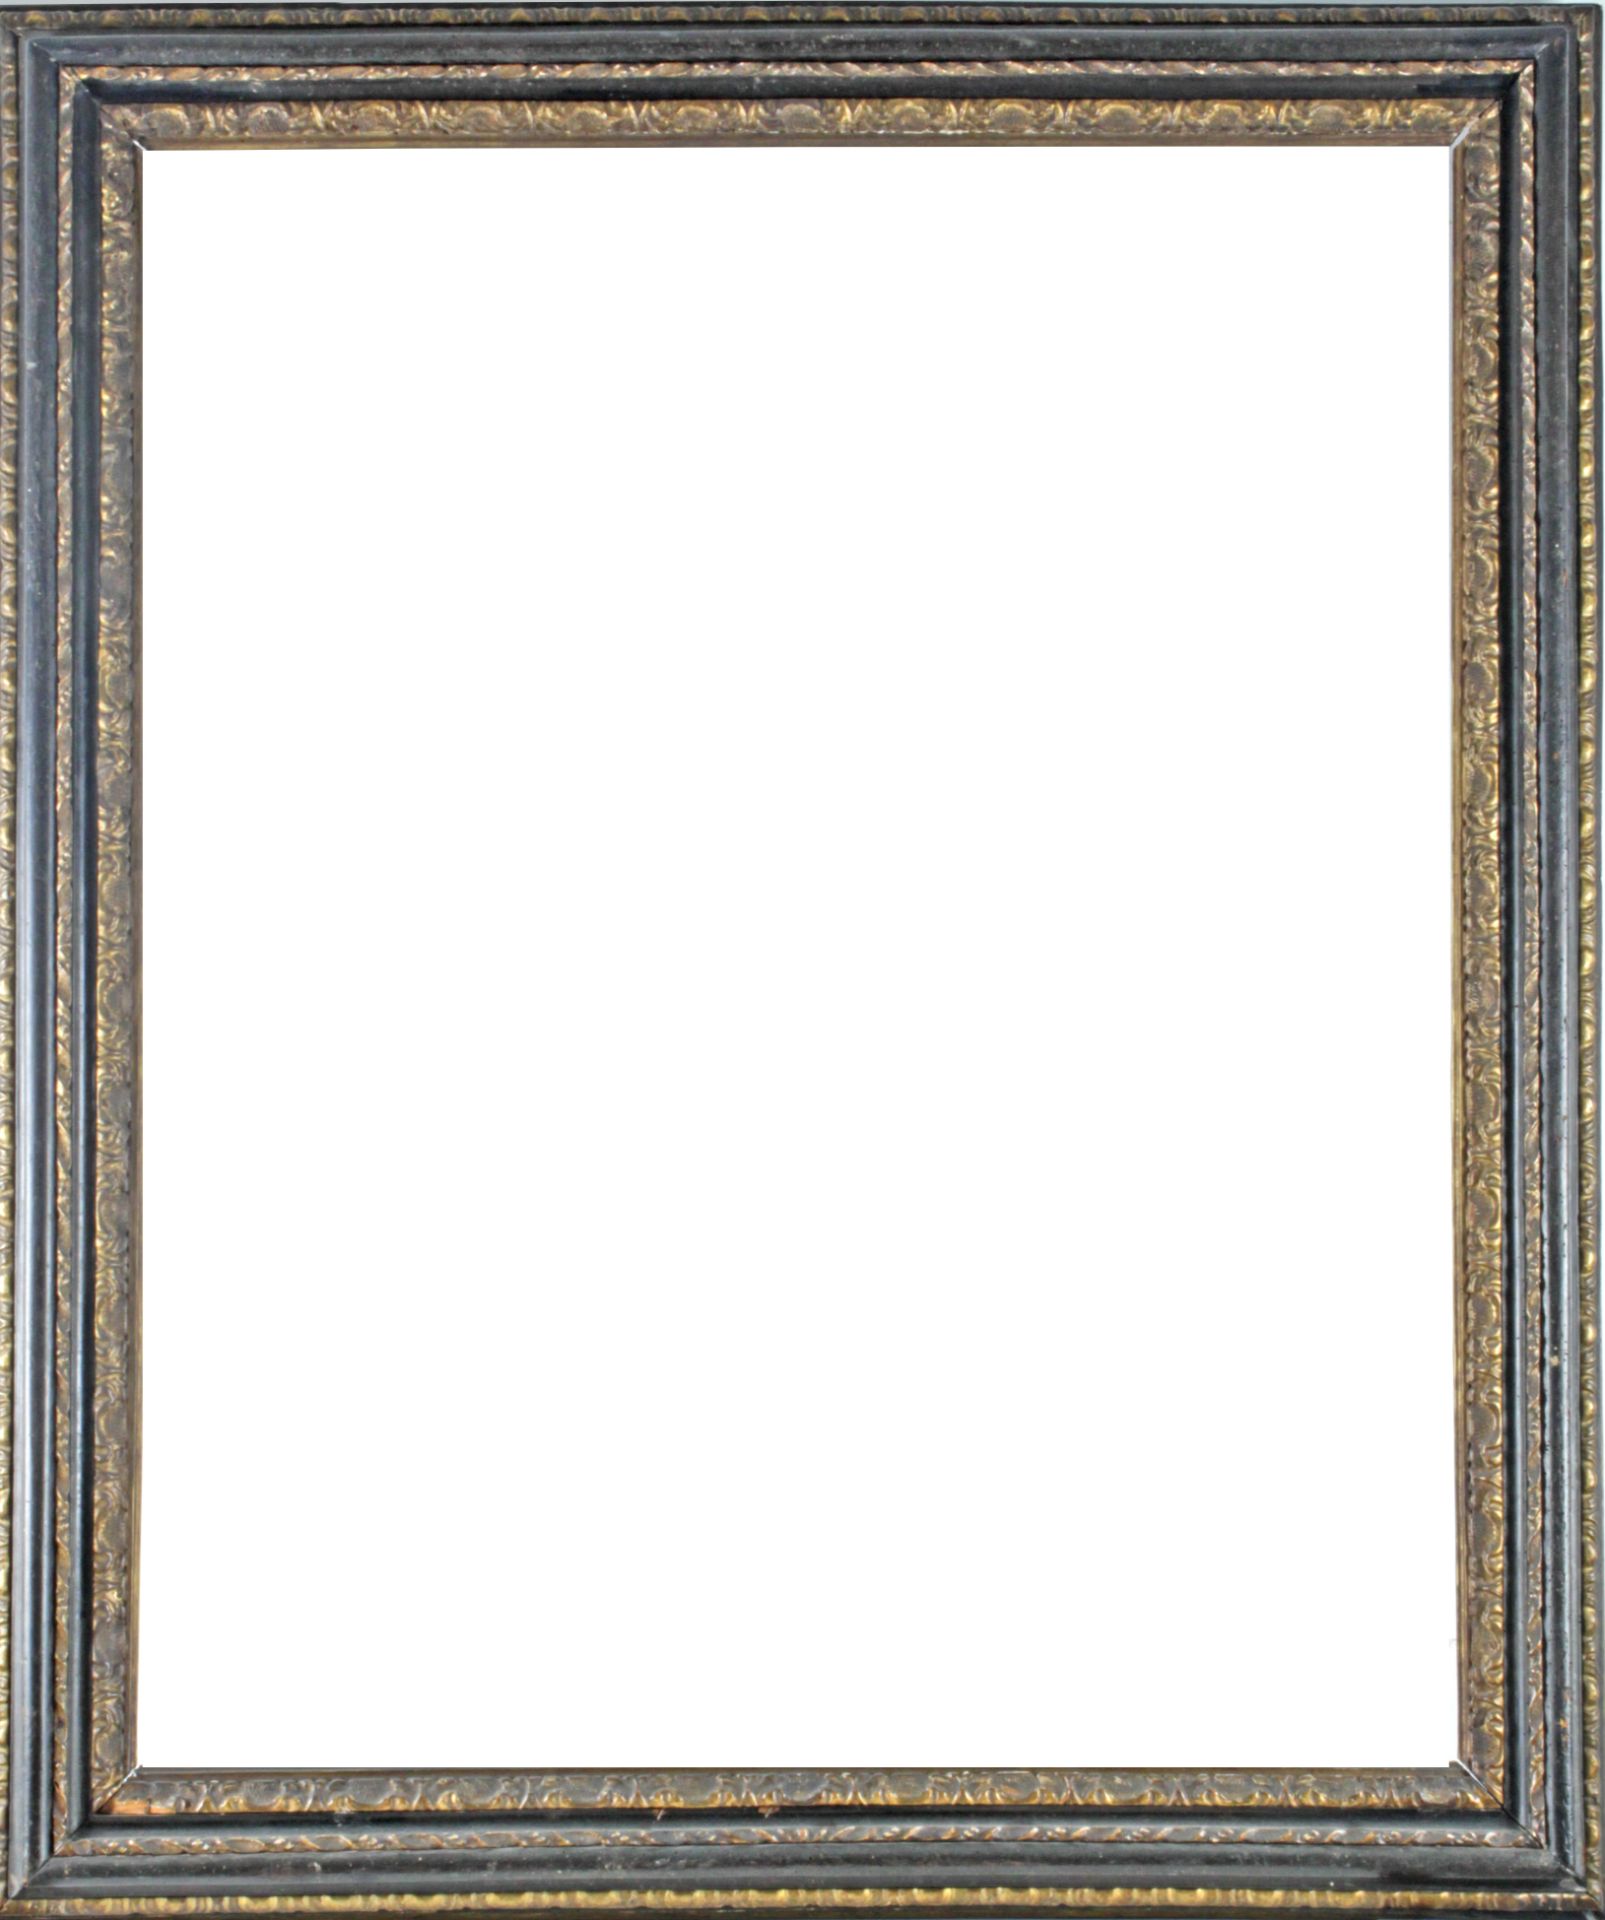 A 19th century Baroque style frame in carved and polychromed wood